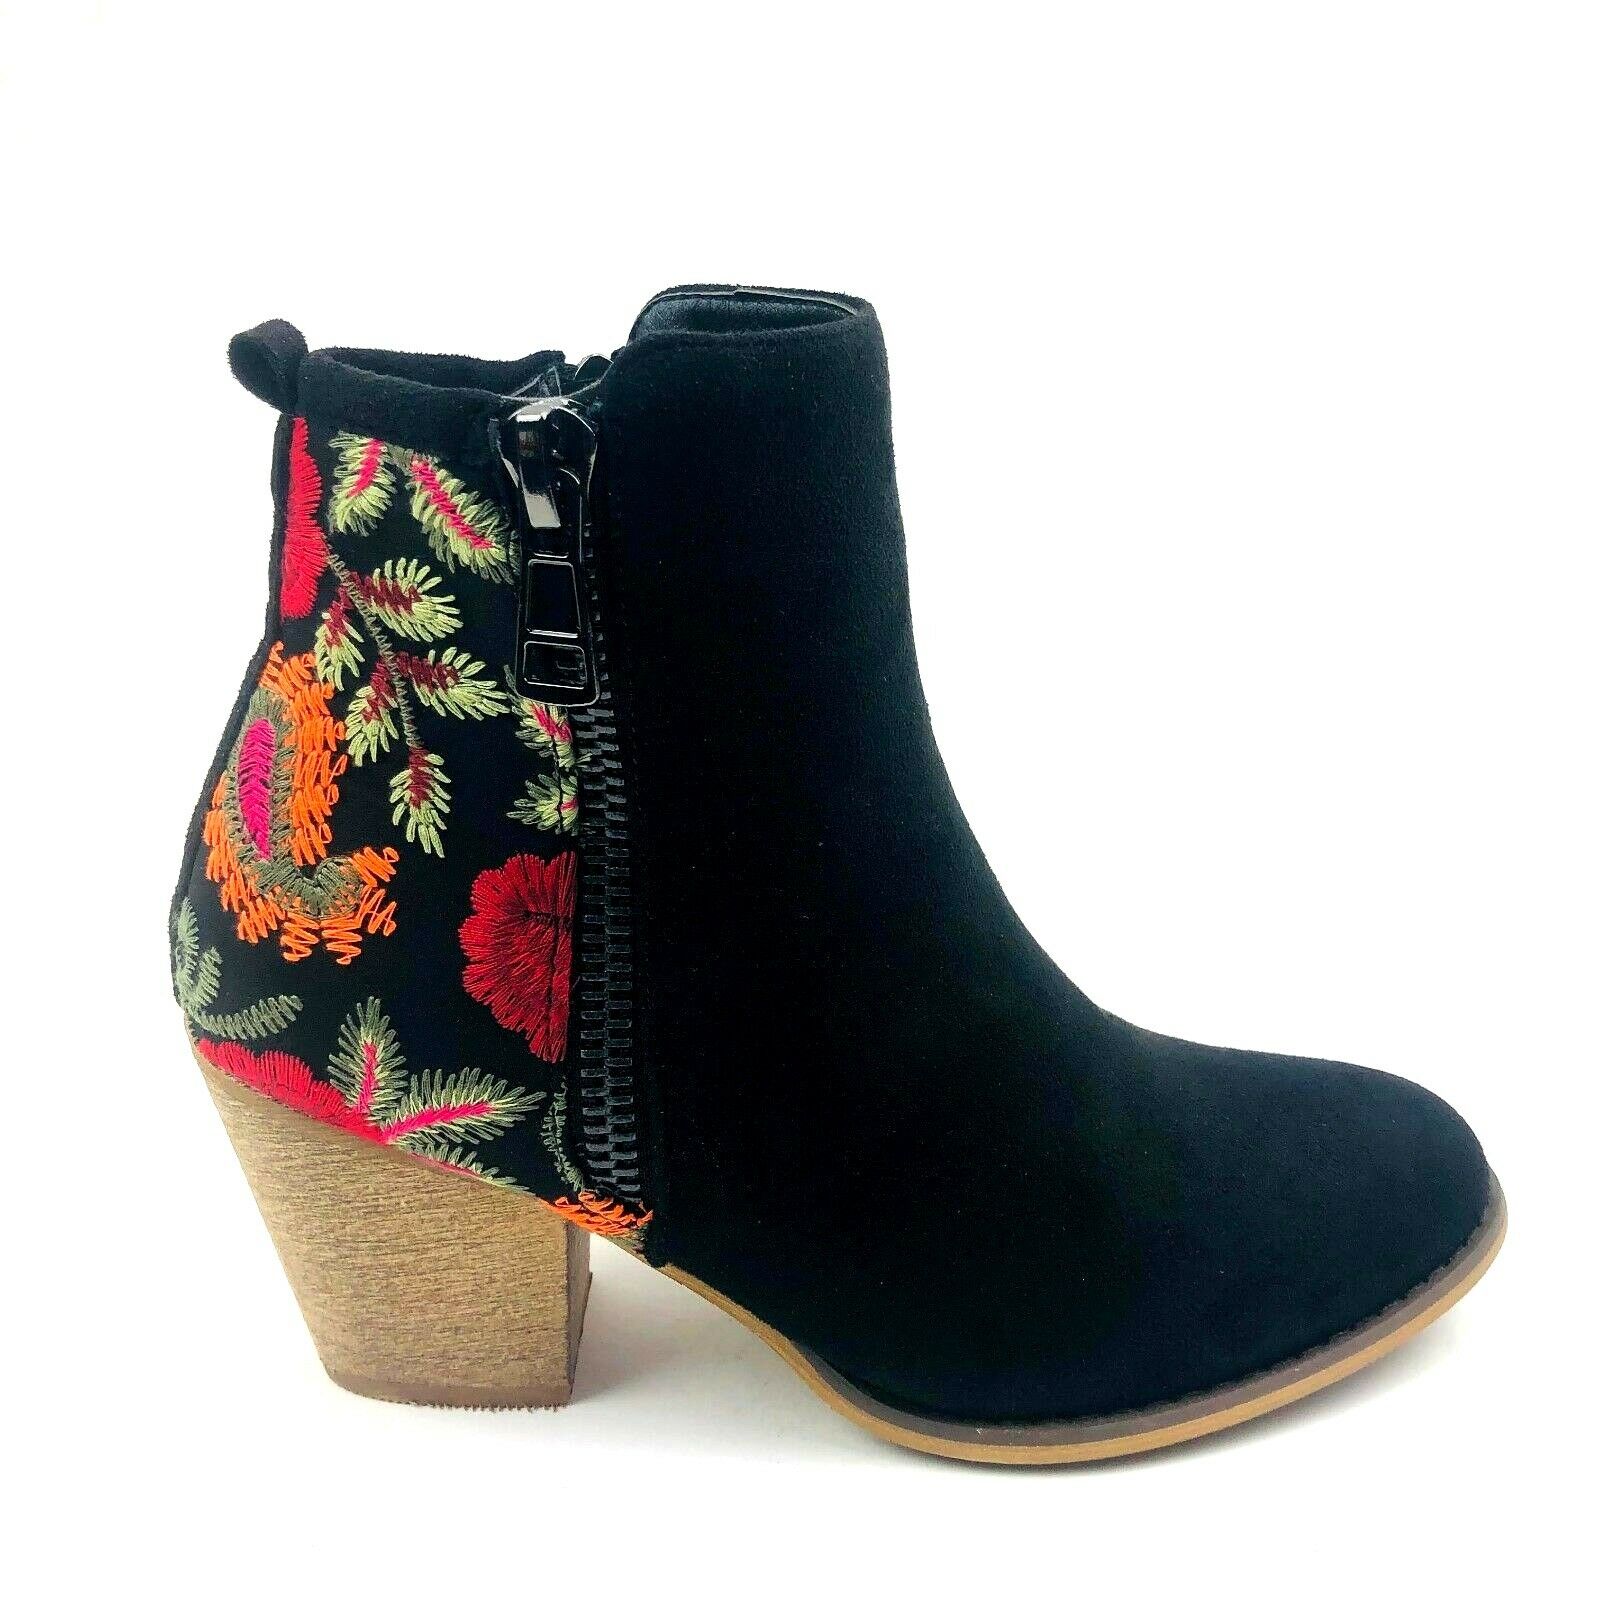 embroidered booties